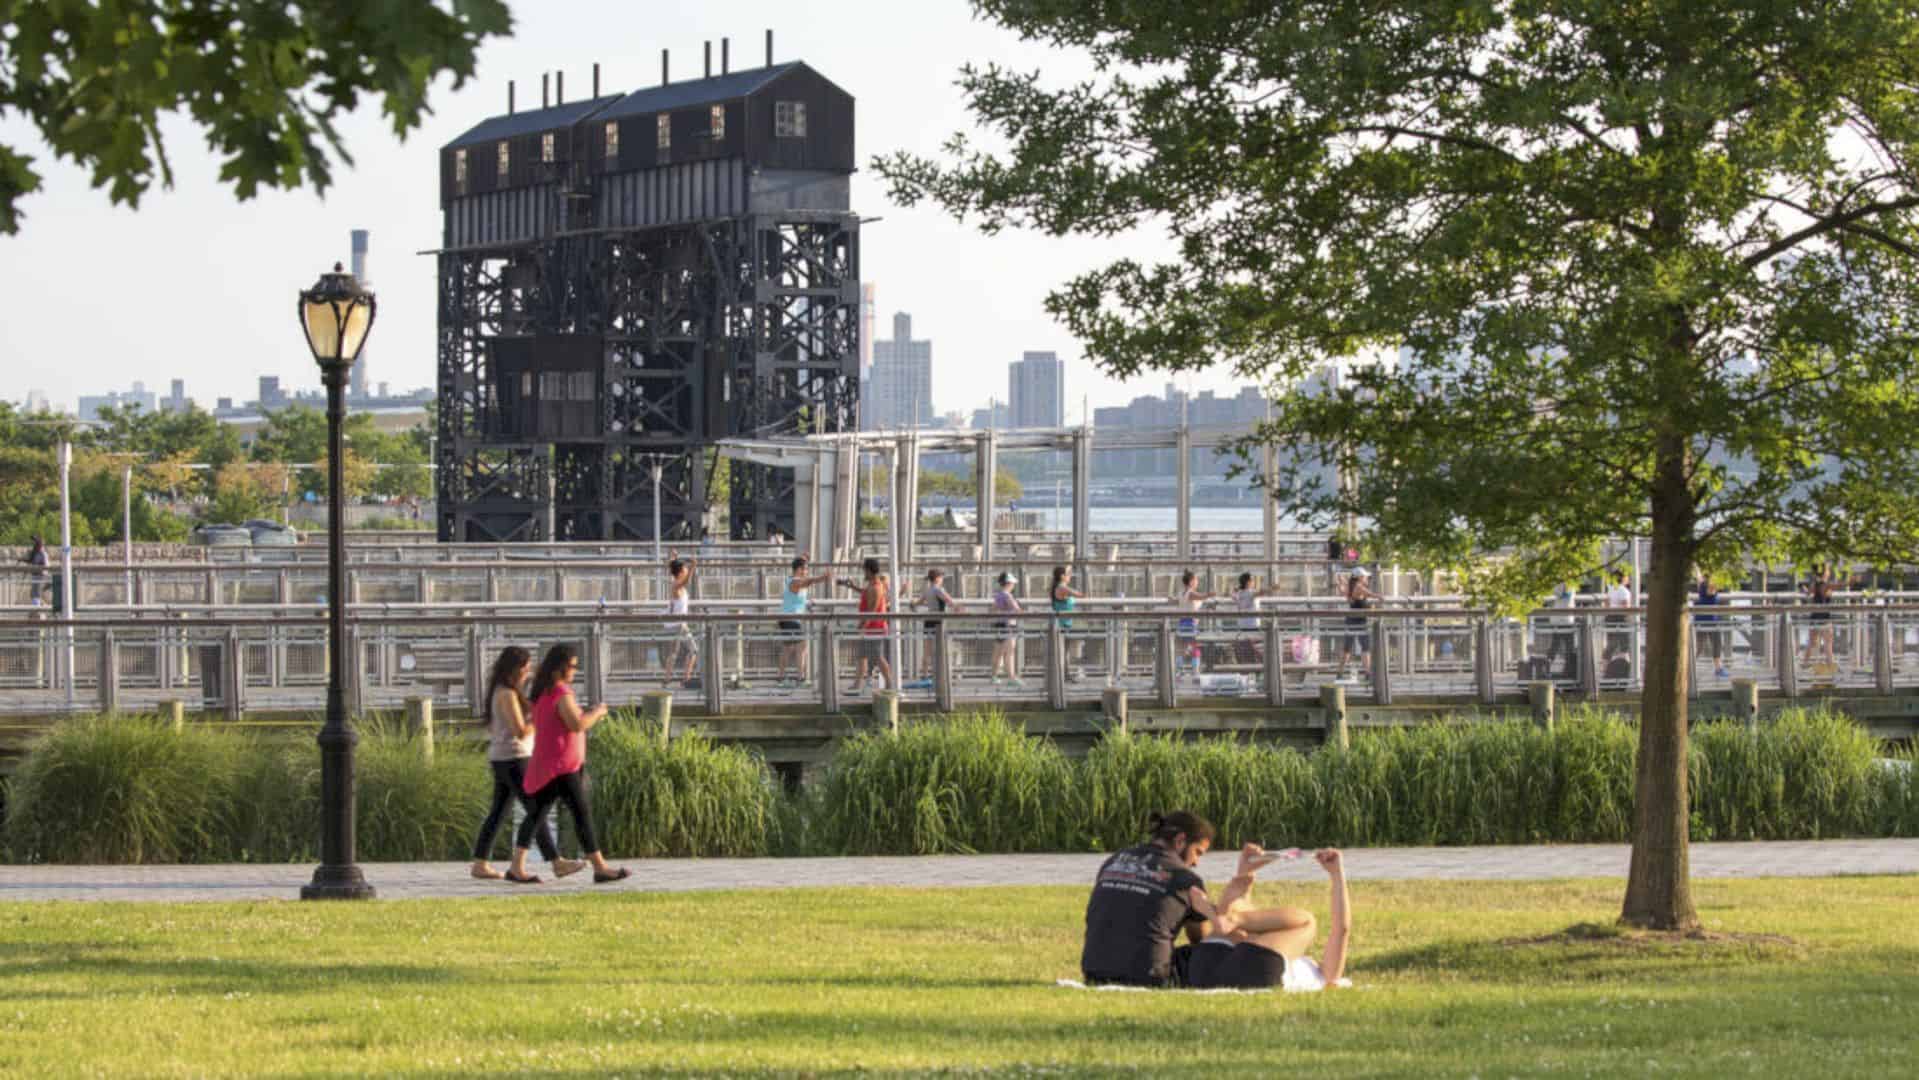 Gantry Plaza State Park A Place Celebrating Its Past Future Skyline Views And The River 4